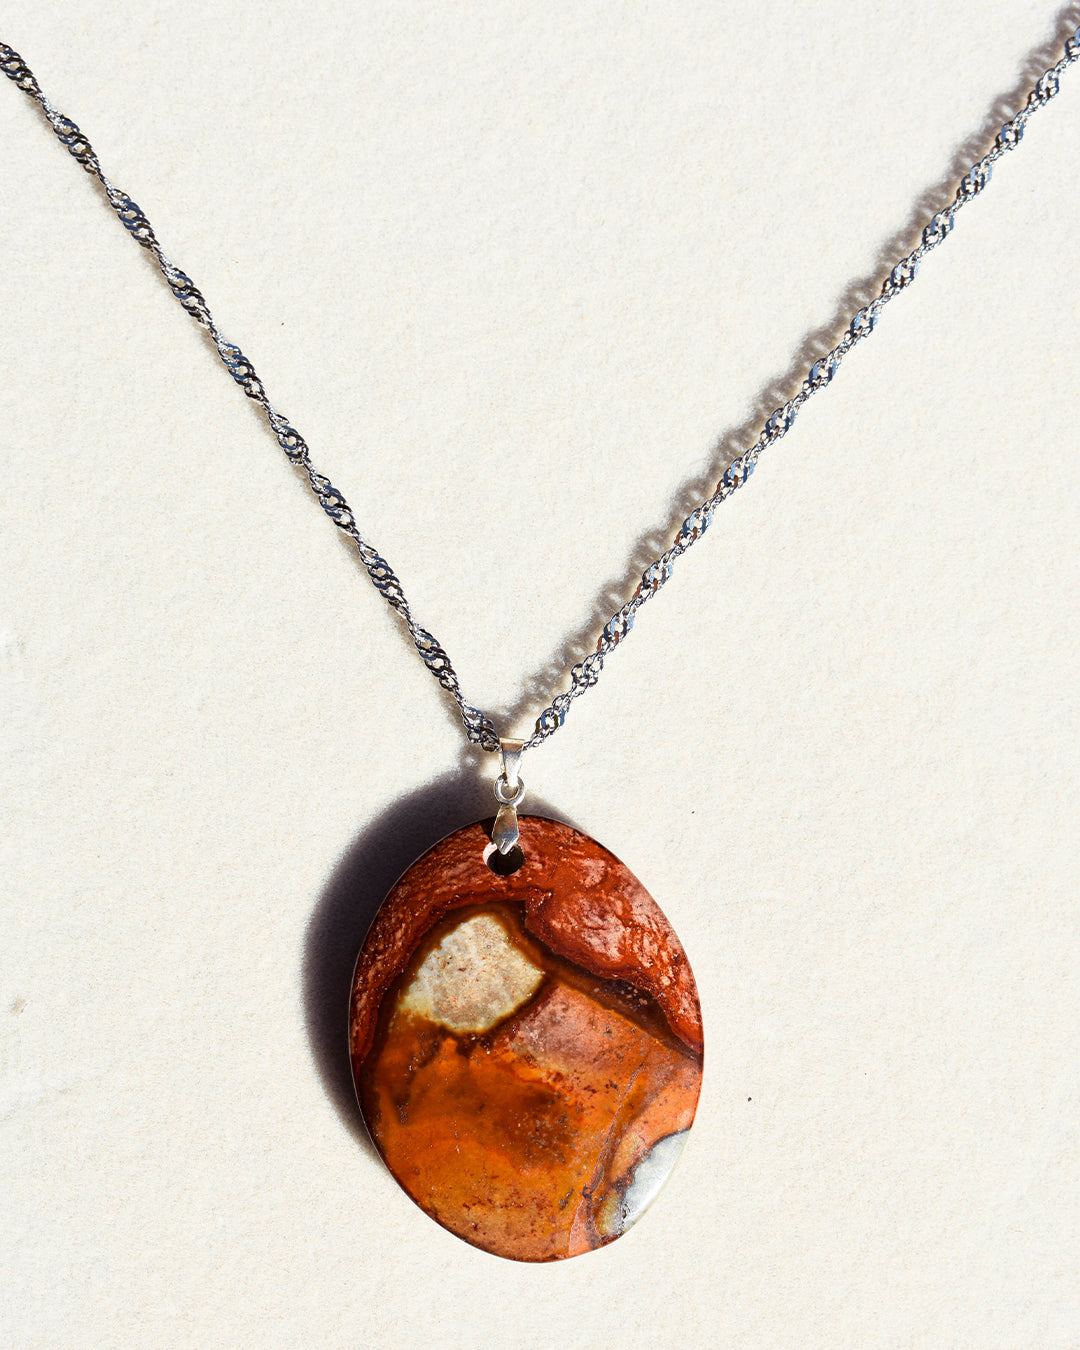 Stainless Steel chain with Polychrome Jasper pendant